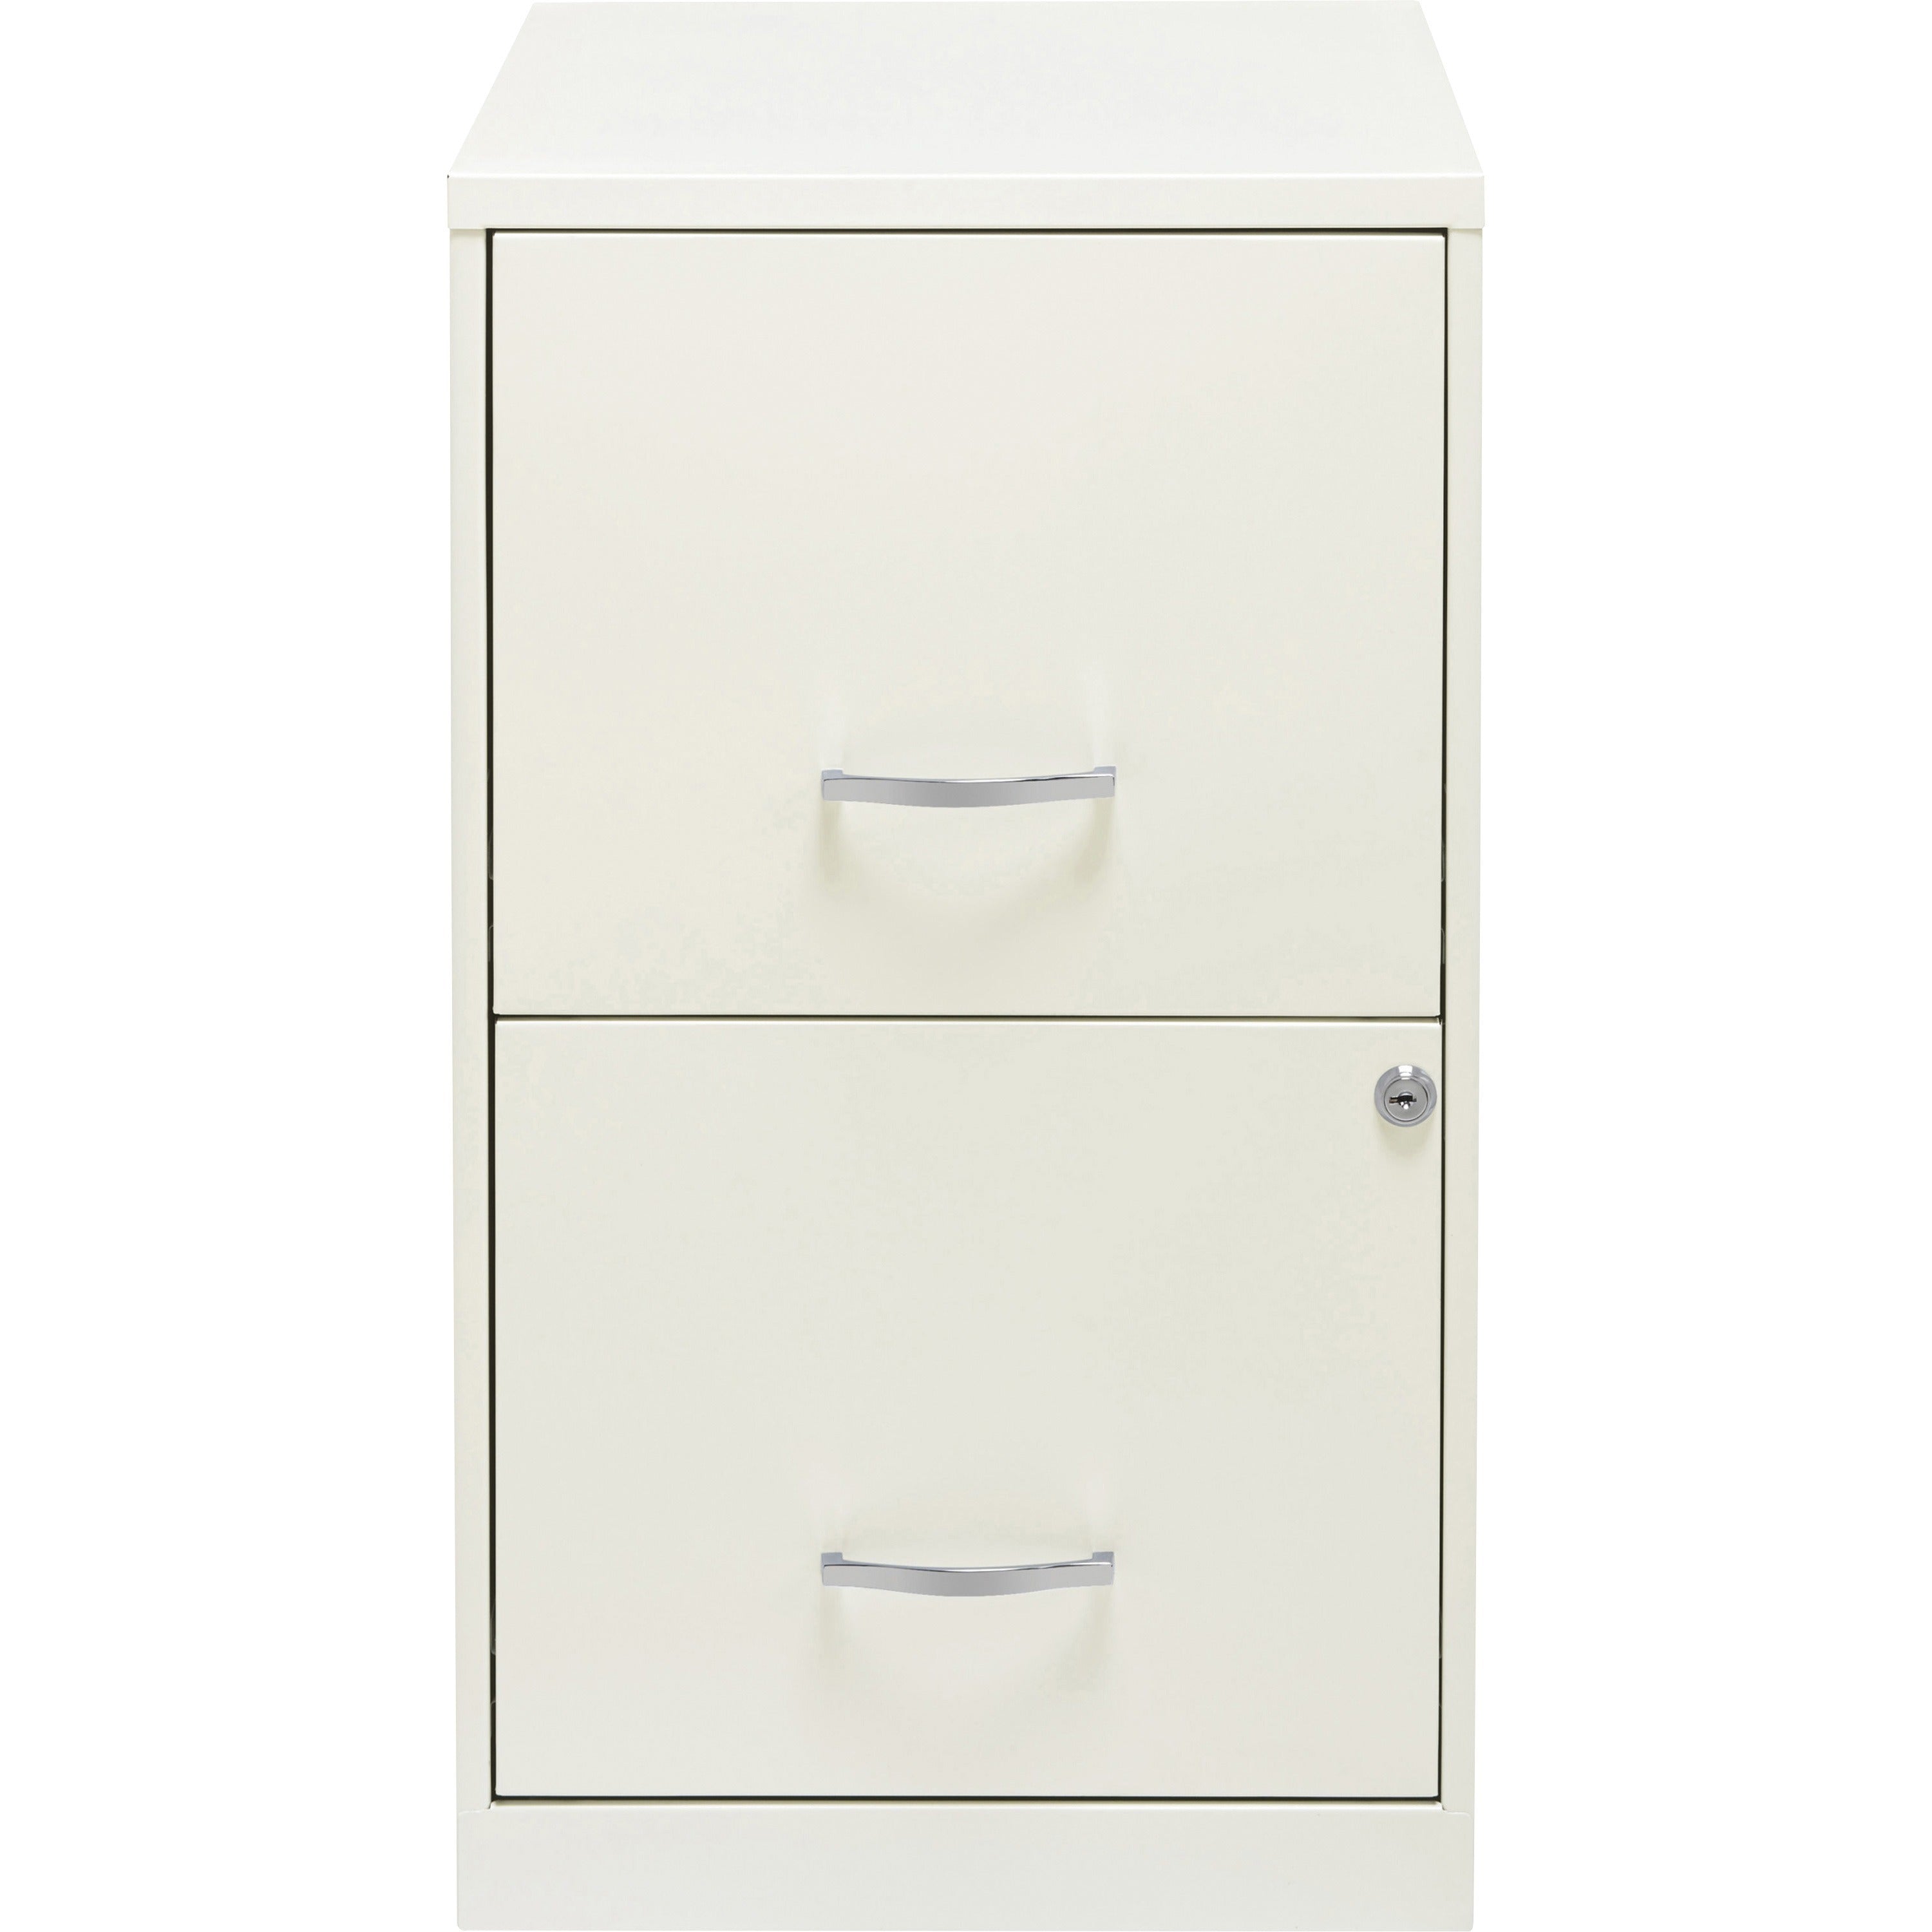 nusparc-file-cabinet-142-x-18-x-245-2-x-drawers-for-file-letter-vertical-locking-drawer-glide-suspension-nonporous-surface-white-baked-enamel-steel-recycled_nprvf218aawe - 2